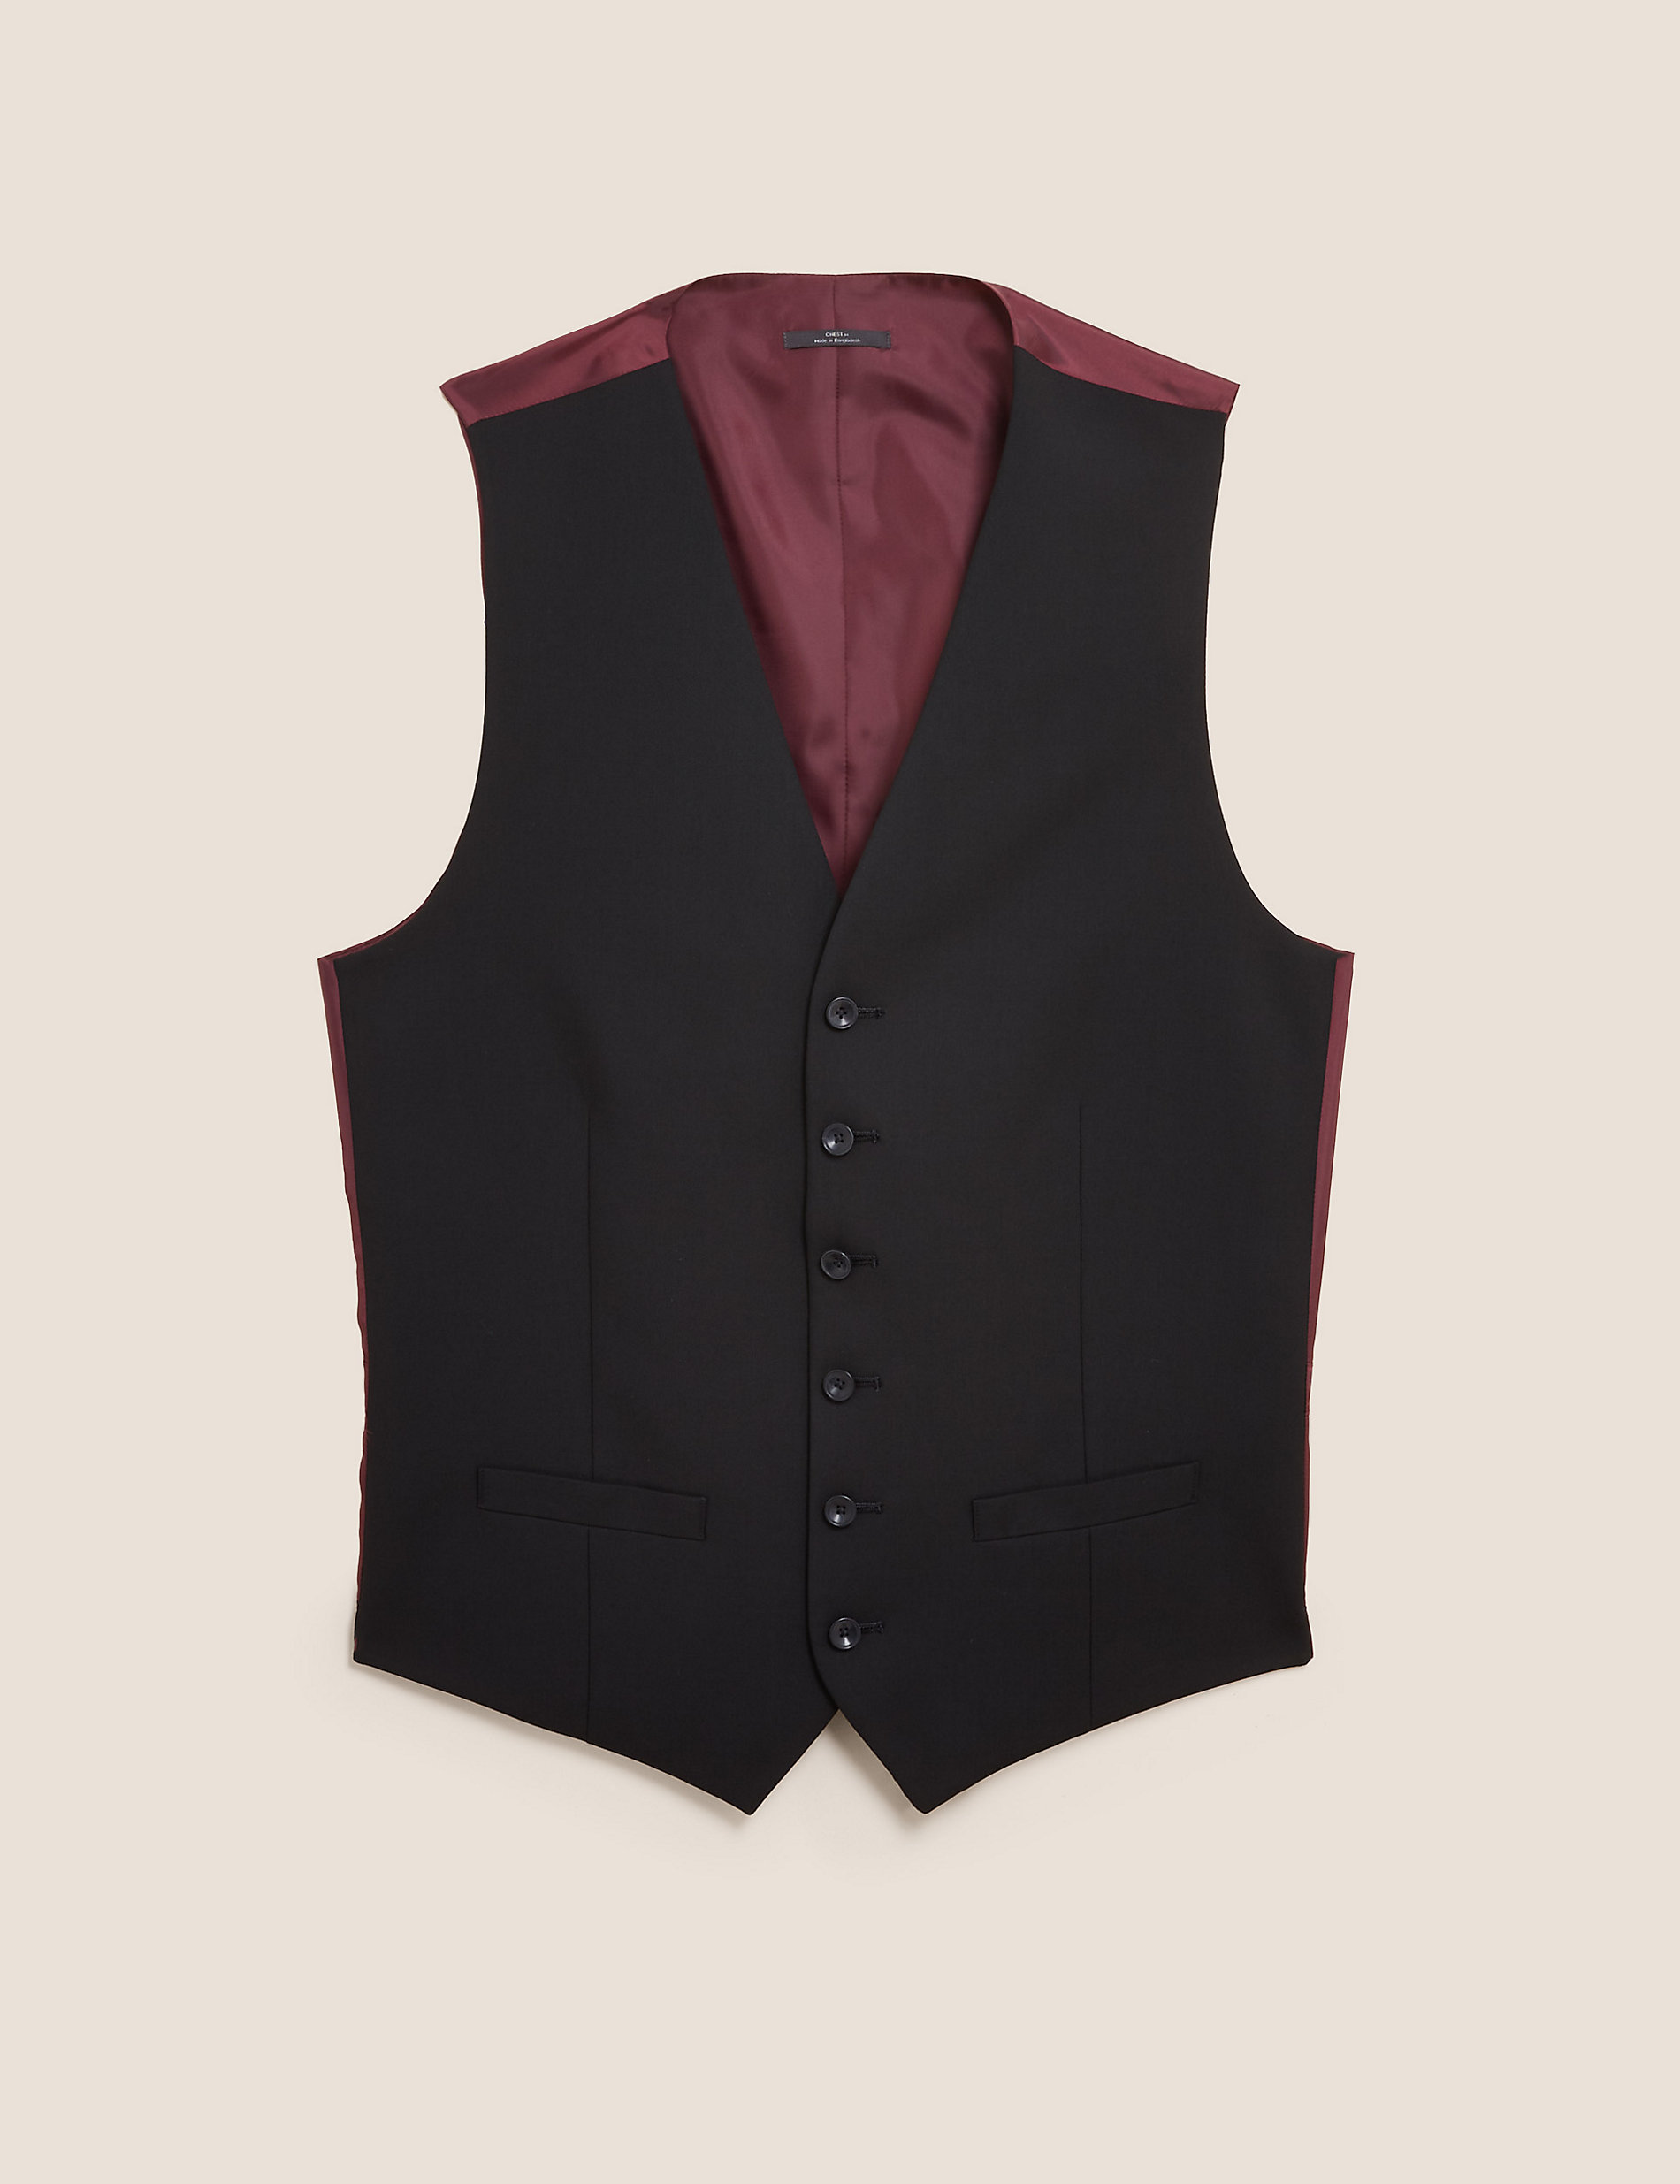 Black Tailored Fit Waistcoat with Stretch